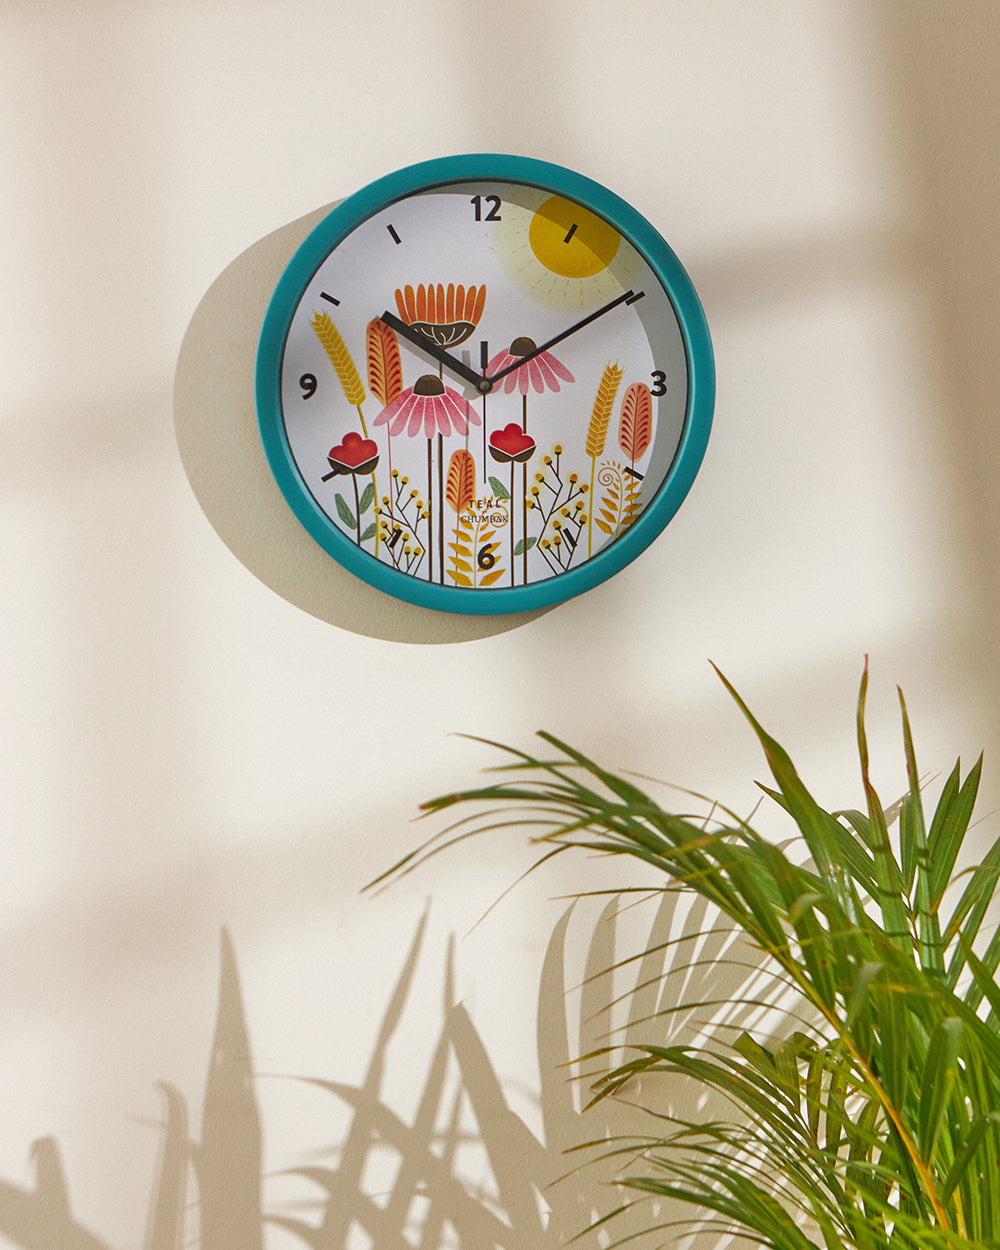 Teal by Chumbak | Sunshine State Wall Clock  | 11 inch